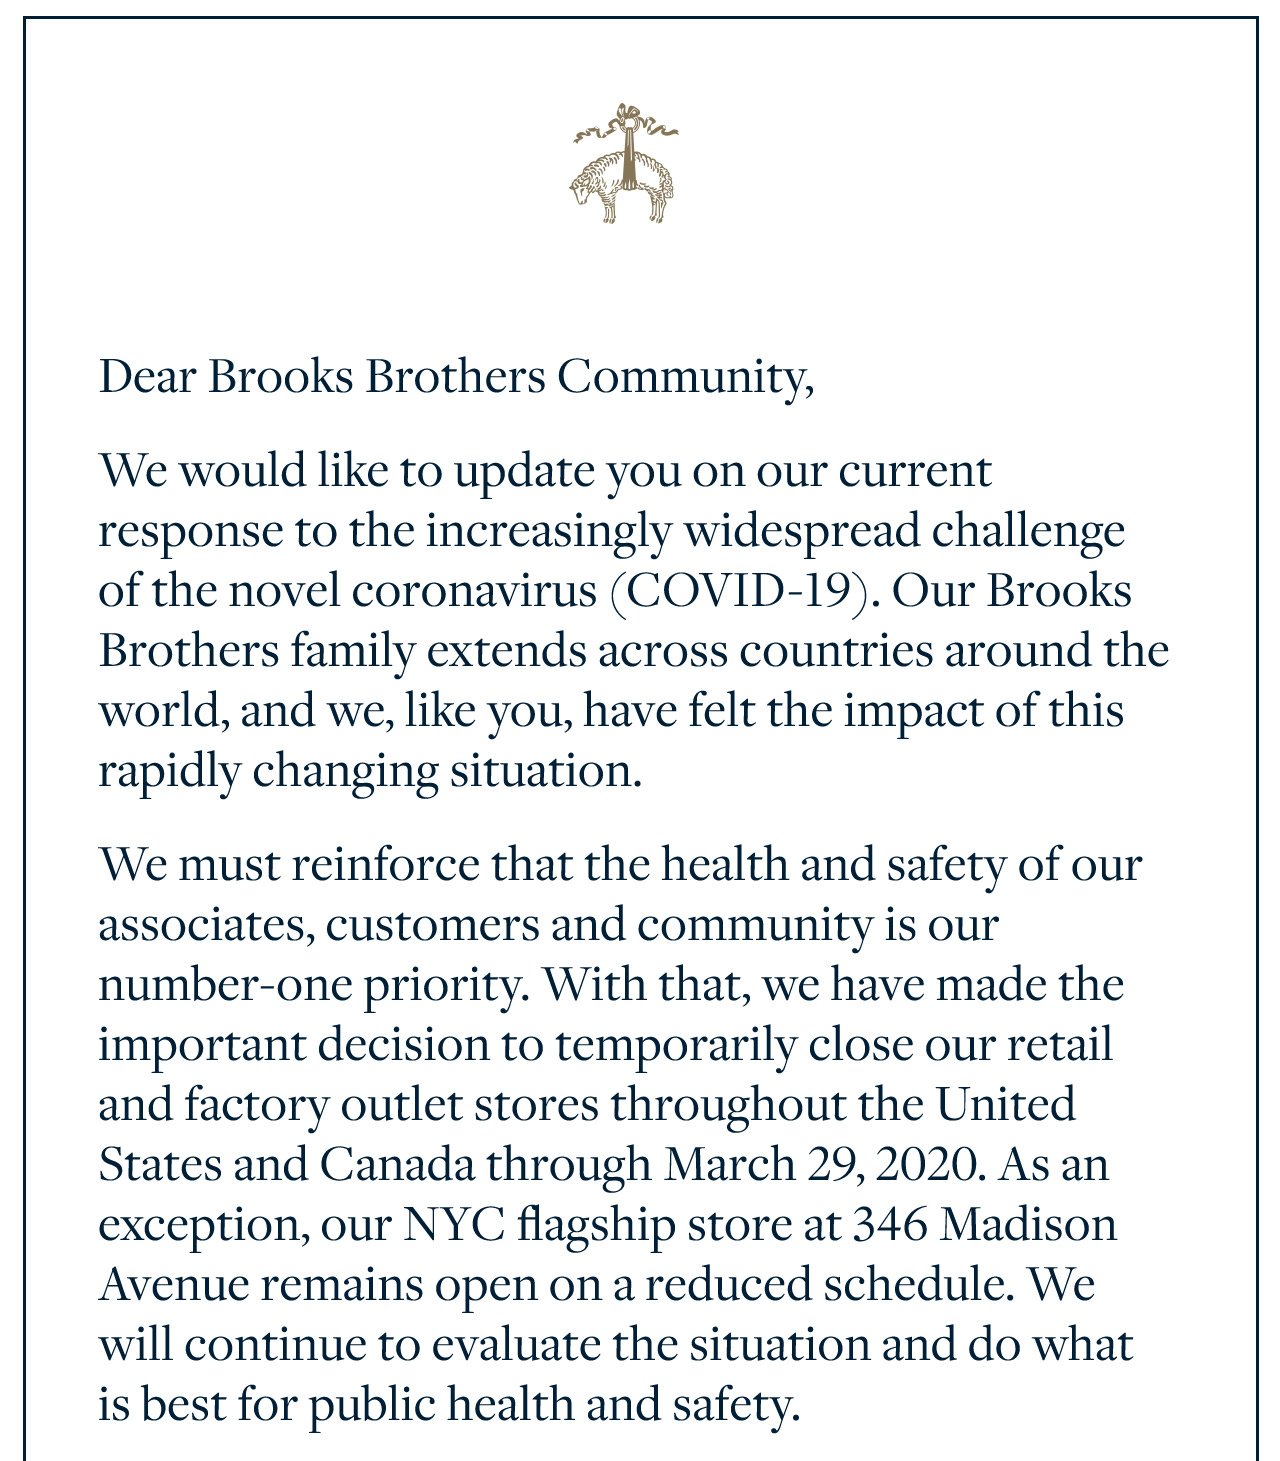 Dear Brooks Brothers Community, We would like to update you on our current response to the increasingly widespread challenge of the novel coronavirus (COVID-19). Our Brooks Brothers family extends across countries around the world, and we, like you, have felt the impact of this rapidly changing situation. We must reinforce that the health and safety of our associates, customers and community is our number-one priority. With that, we have made the important decision to temporarily close our retail and factory outlet stores throughout the United States and Canada through March 29, 2020. As an exception, our NYC flagship store at 346 Madison
 Avenue remains open on a reduced schedule. We will continue to evaluate the situation and do what is best for public health and safety.